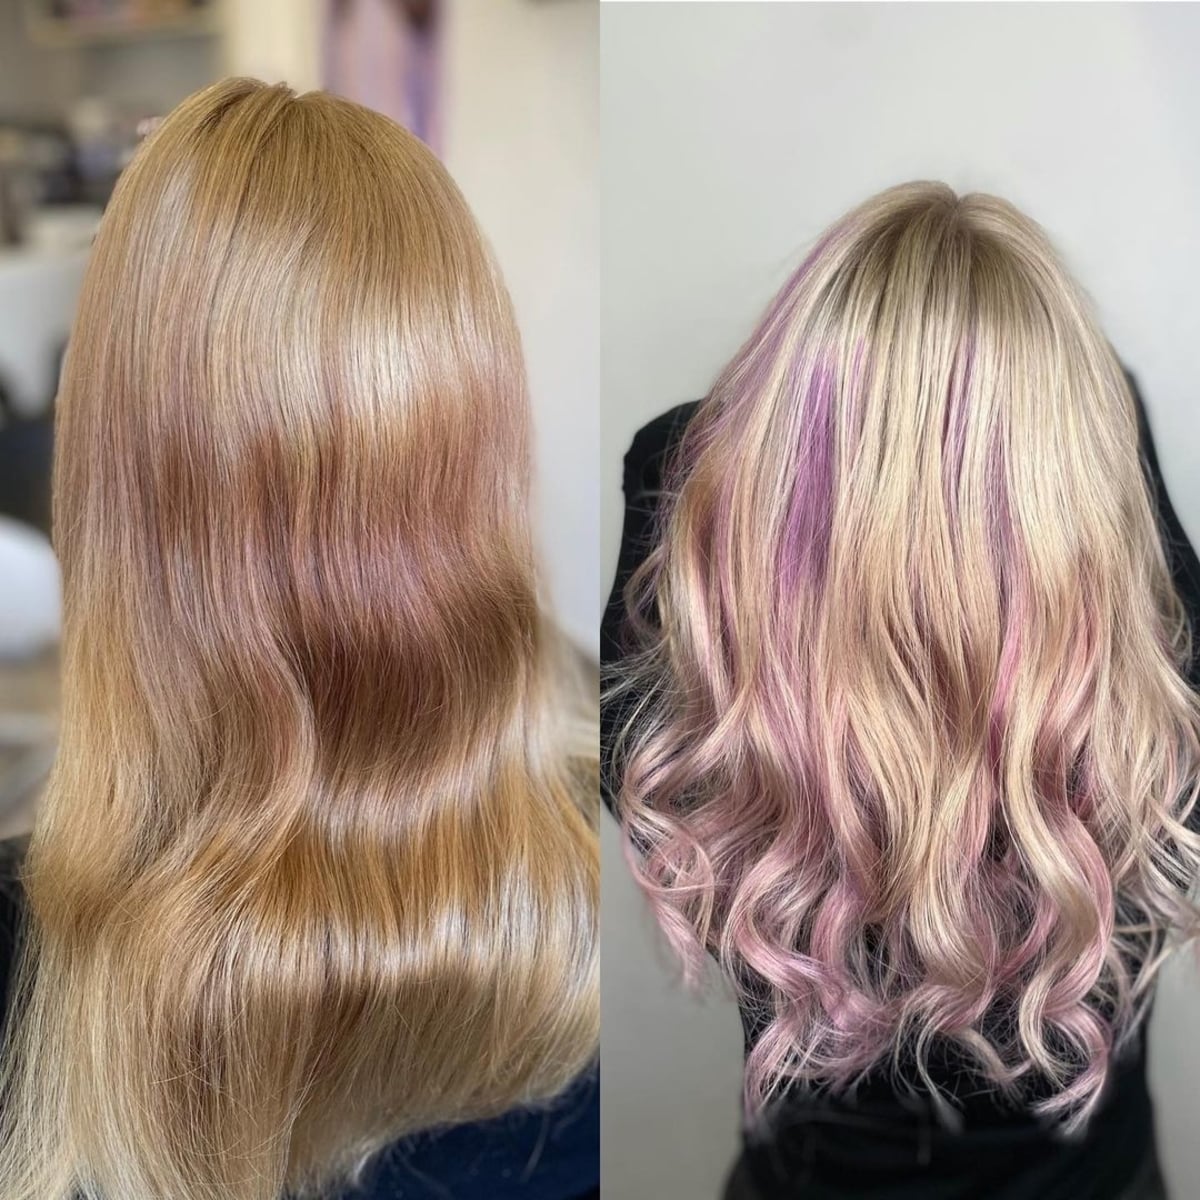 Blonde hair with light purple highlights